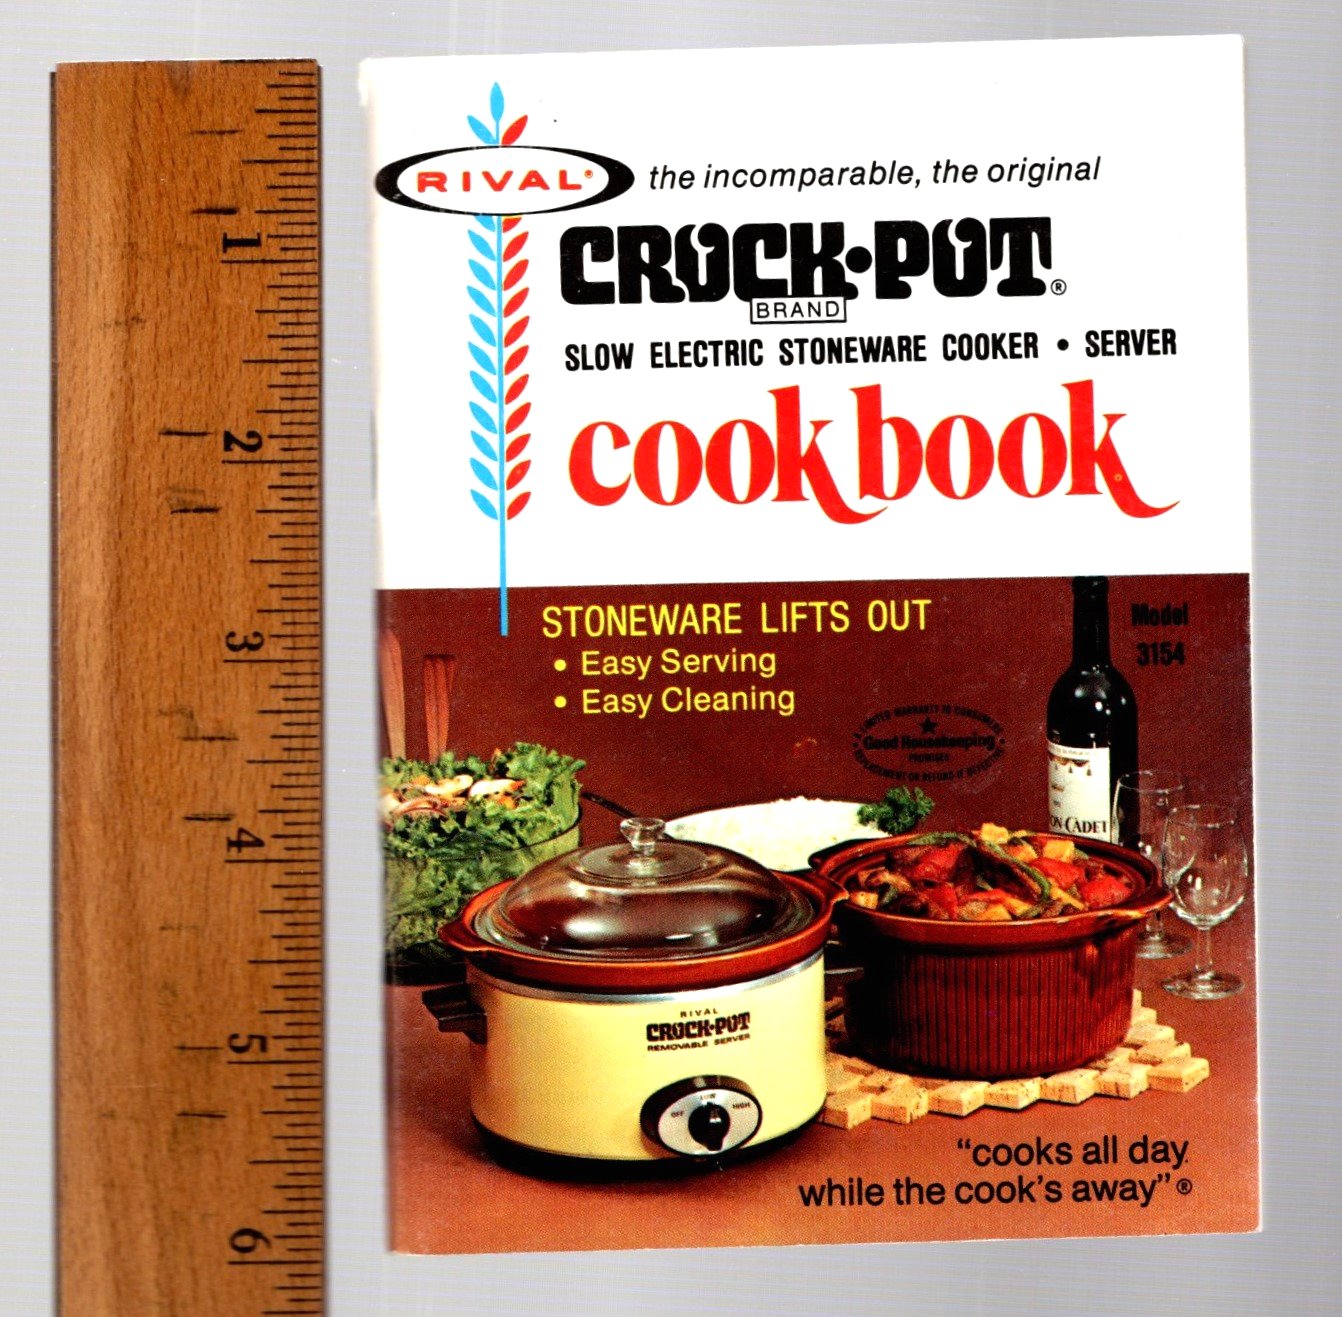 Image for Rival Crockpot, the Incomparable, the Original :  Crock Pot Brand Slow Electric Stonewear Cooker, Server, Cookbook